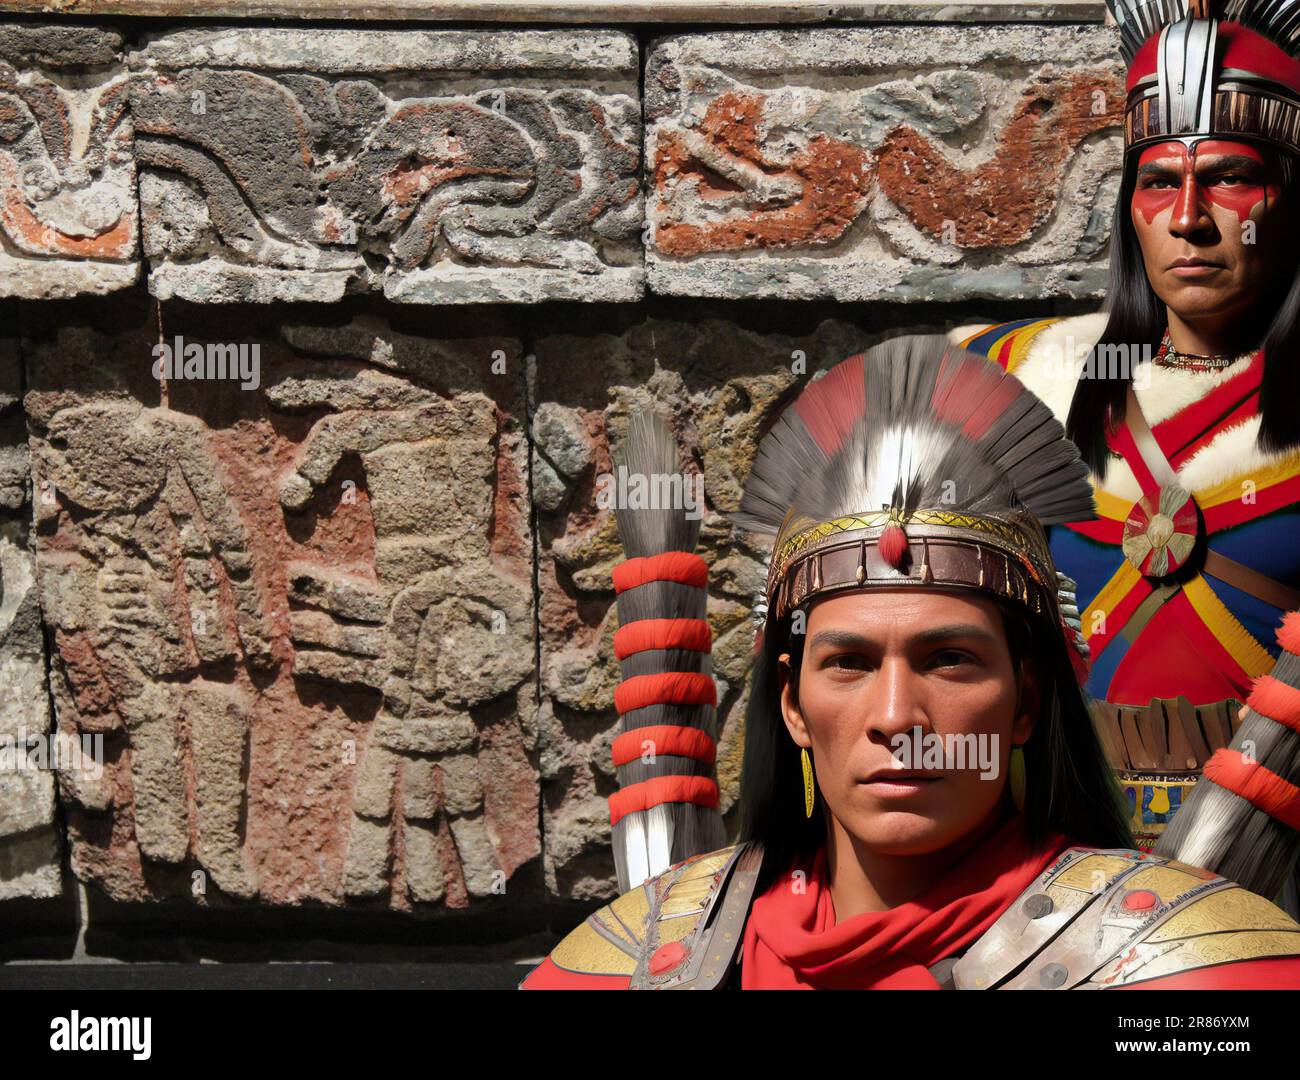 Pre-Columbian warriors against the background of the walls of Teotihuacan the famous pre-Columbian city of Mesoamerica located in the Valley of Mexico Stock Photo